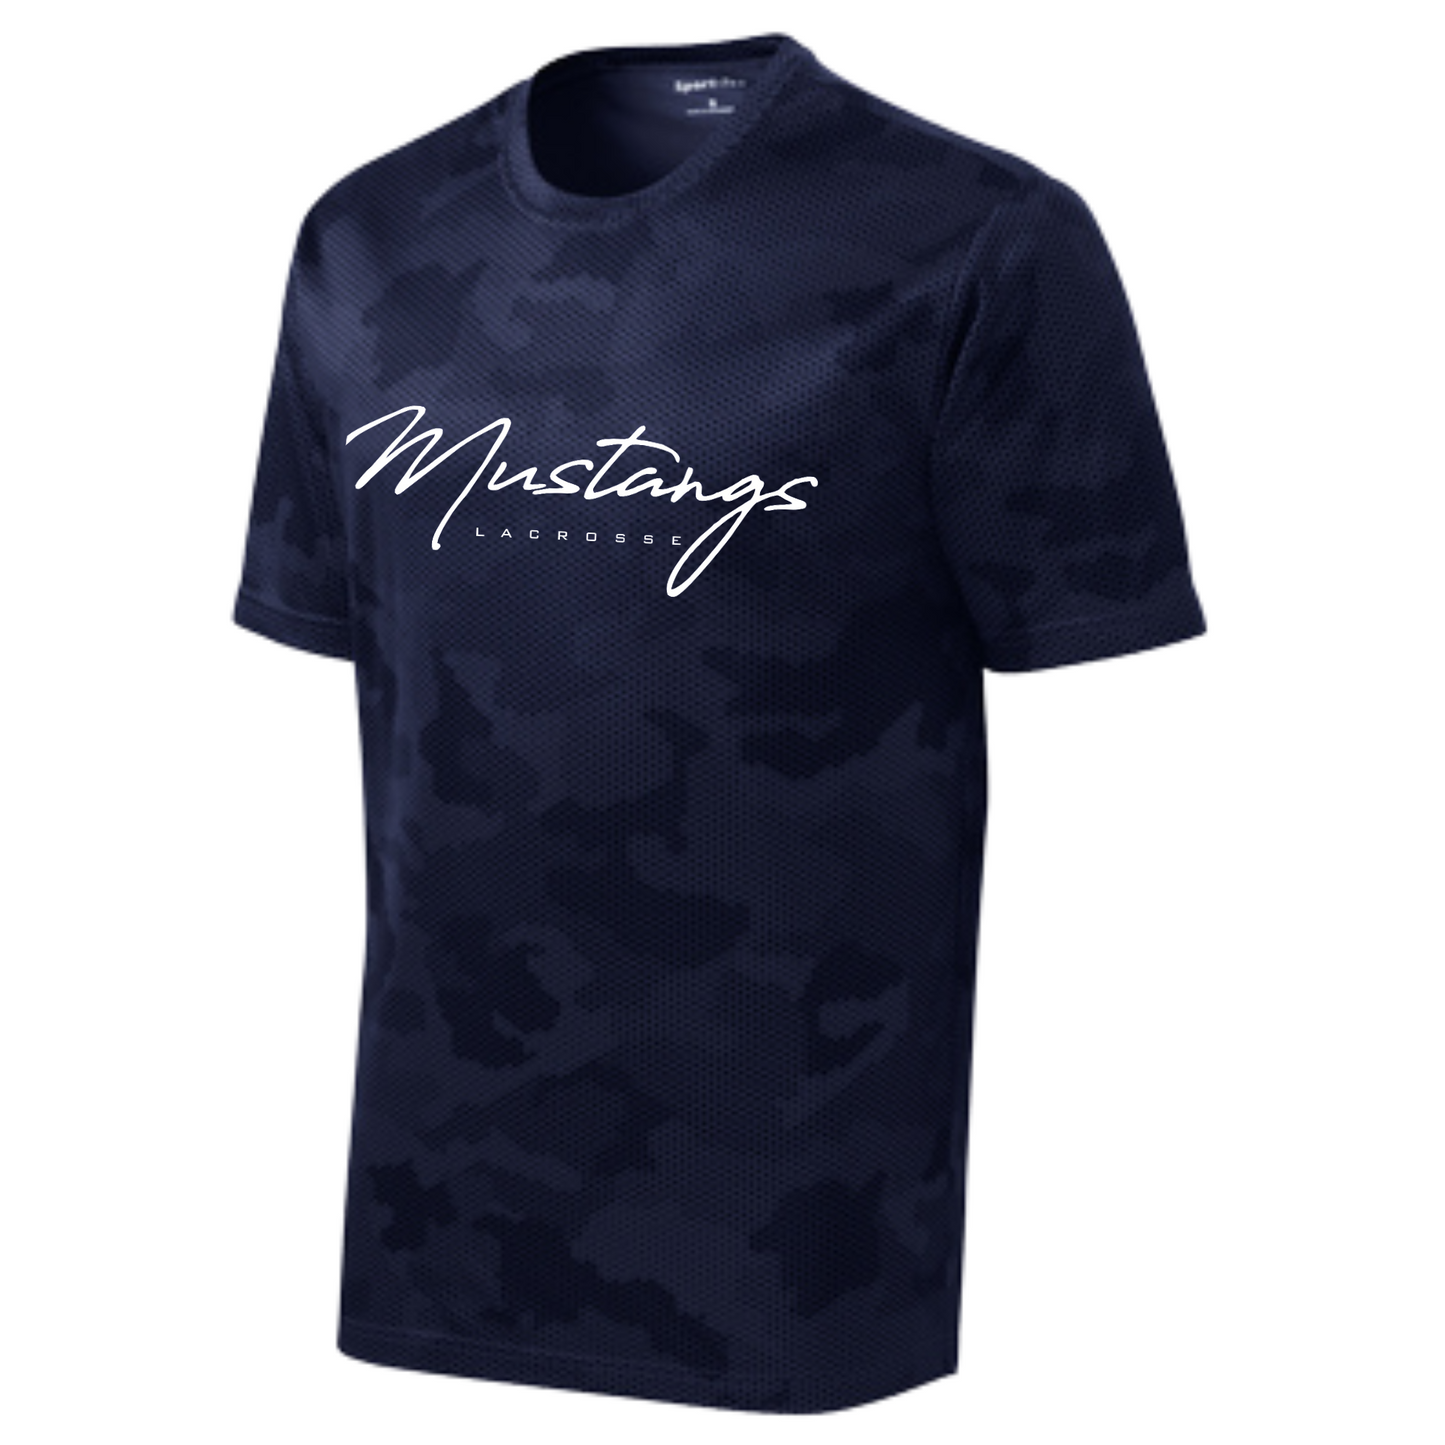 MEDWAY YOUTH LACROSSE MUSTANGS SPORT-TEK CAMOHEX YOUTH TEE - NAVY